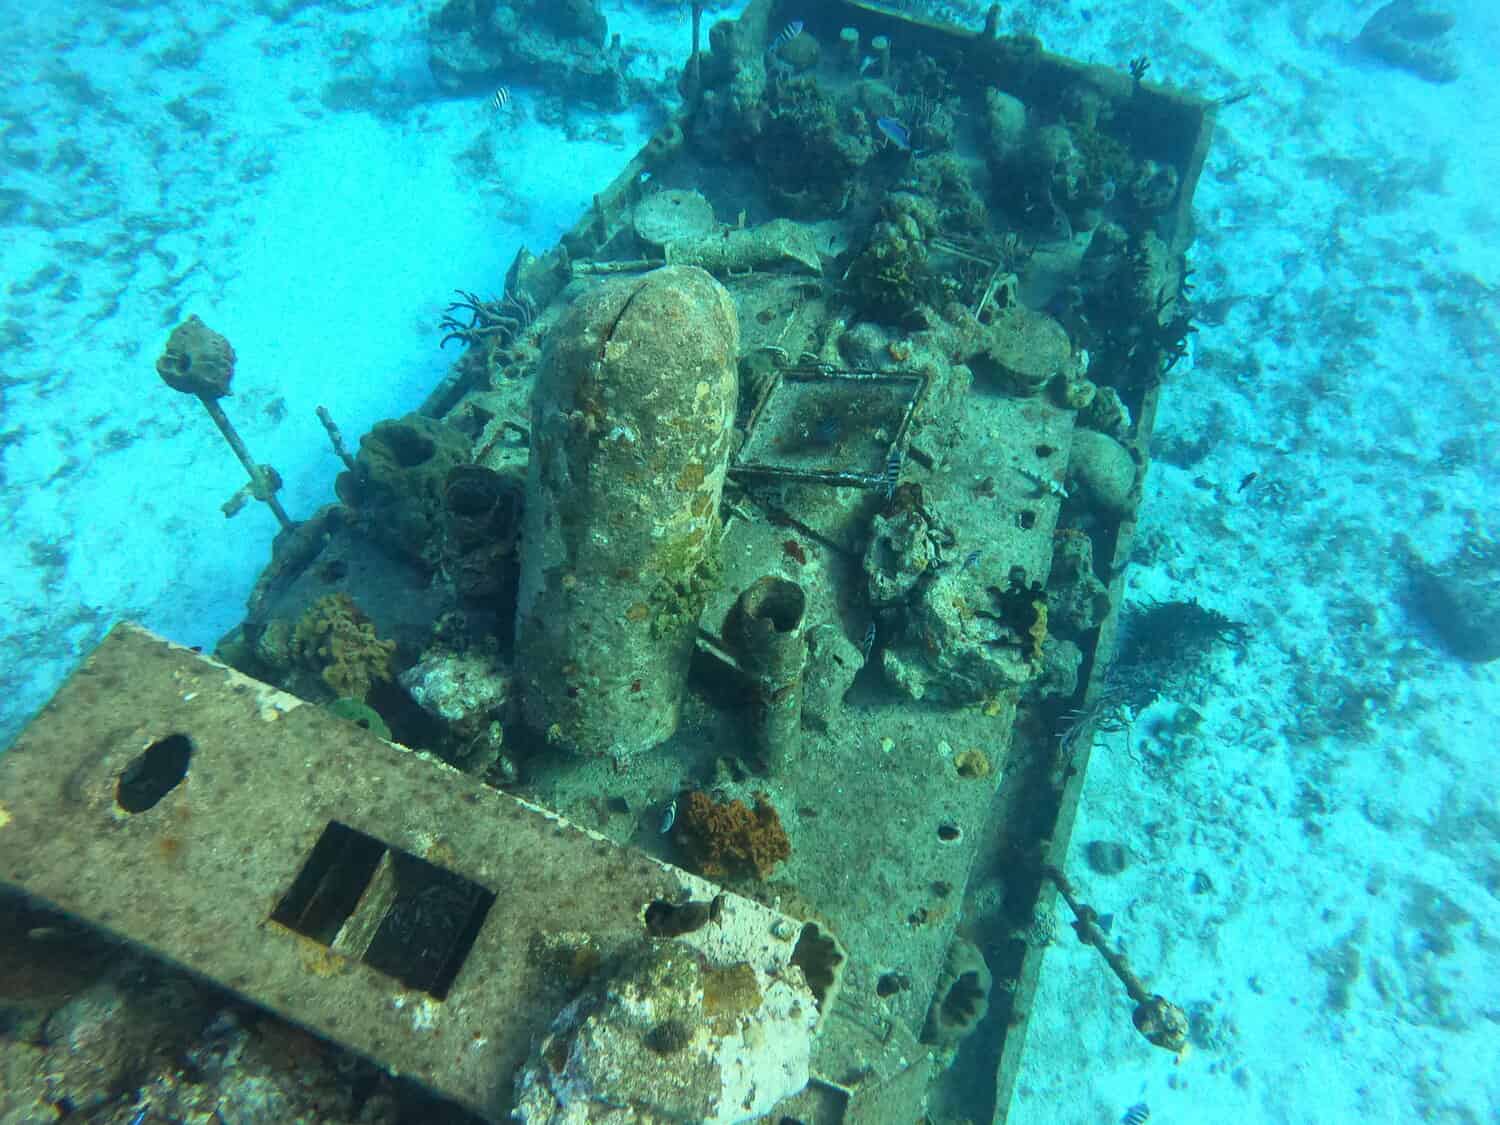 Shipwreck underneath the clear waters of the Caribbean island of Cozumel